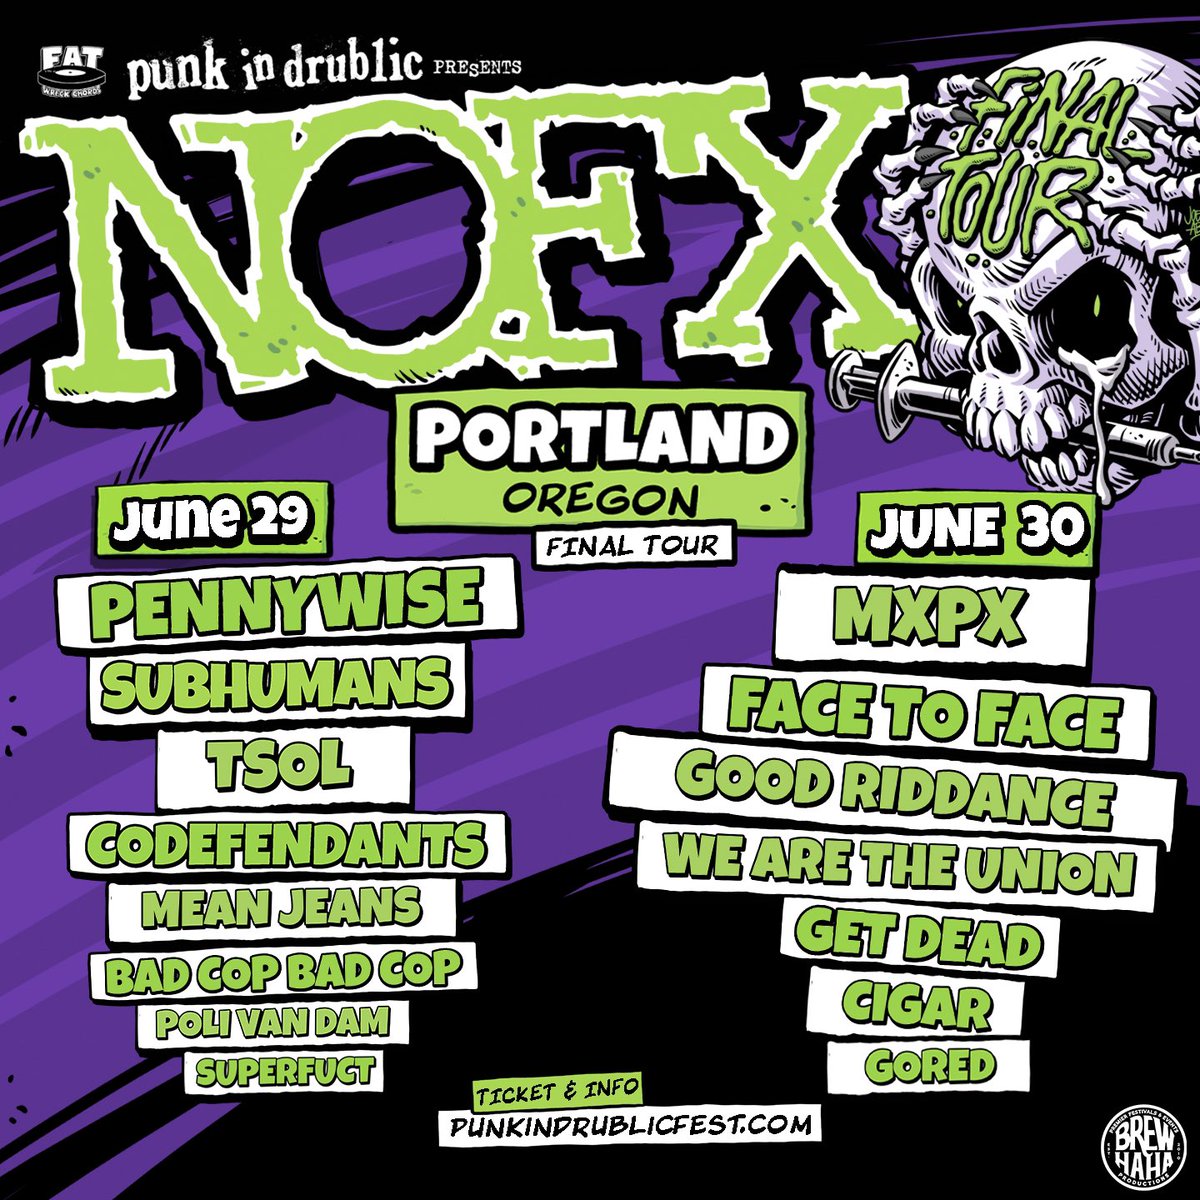 Portland! See you in the pit for Punk In Drublic 👊 Tickets on sale now at punkindrublicfest.com @MonsterMusic